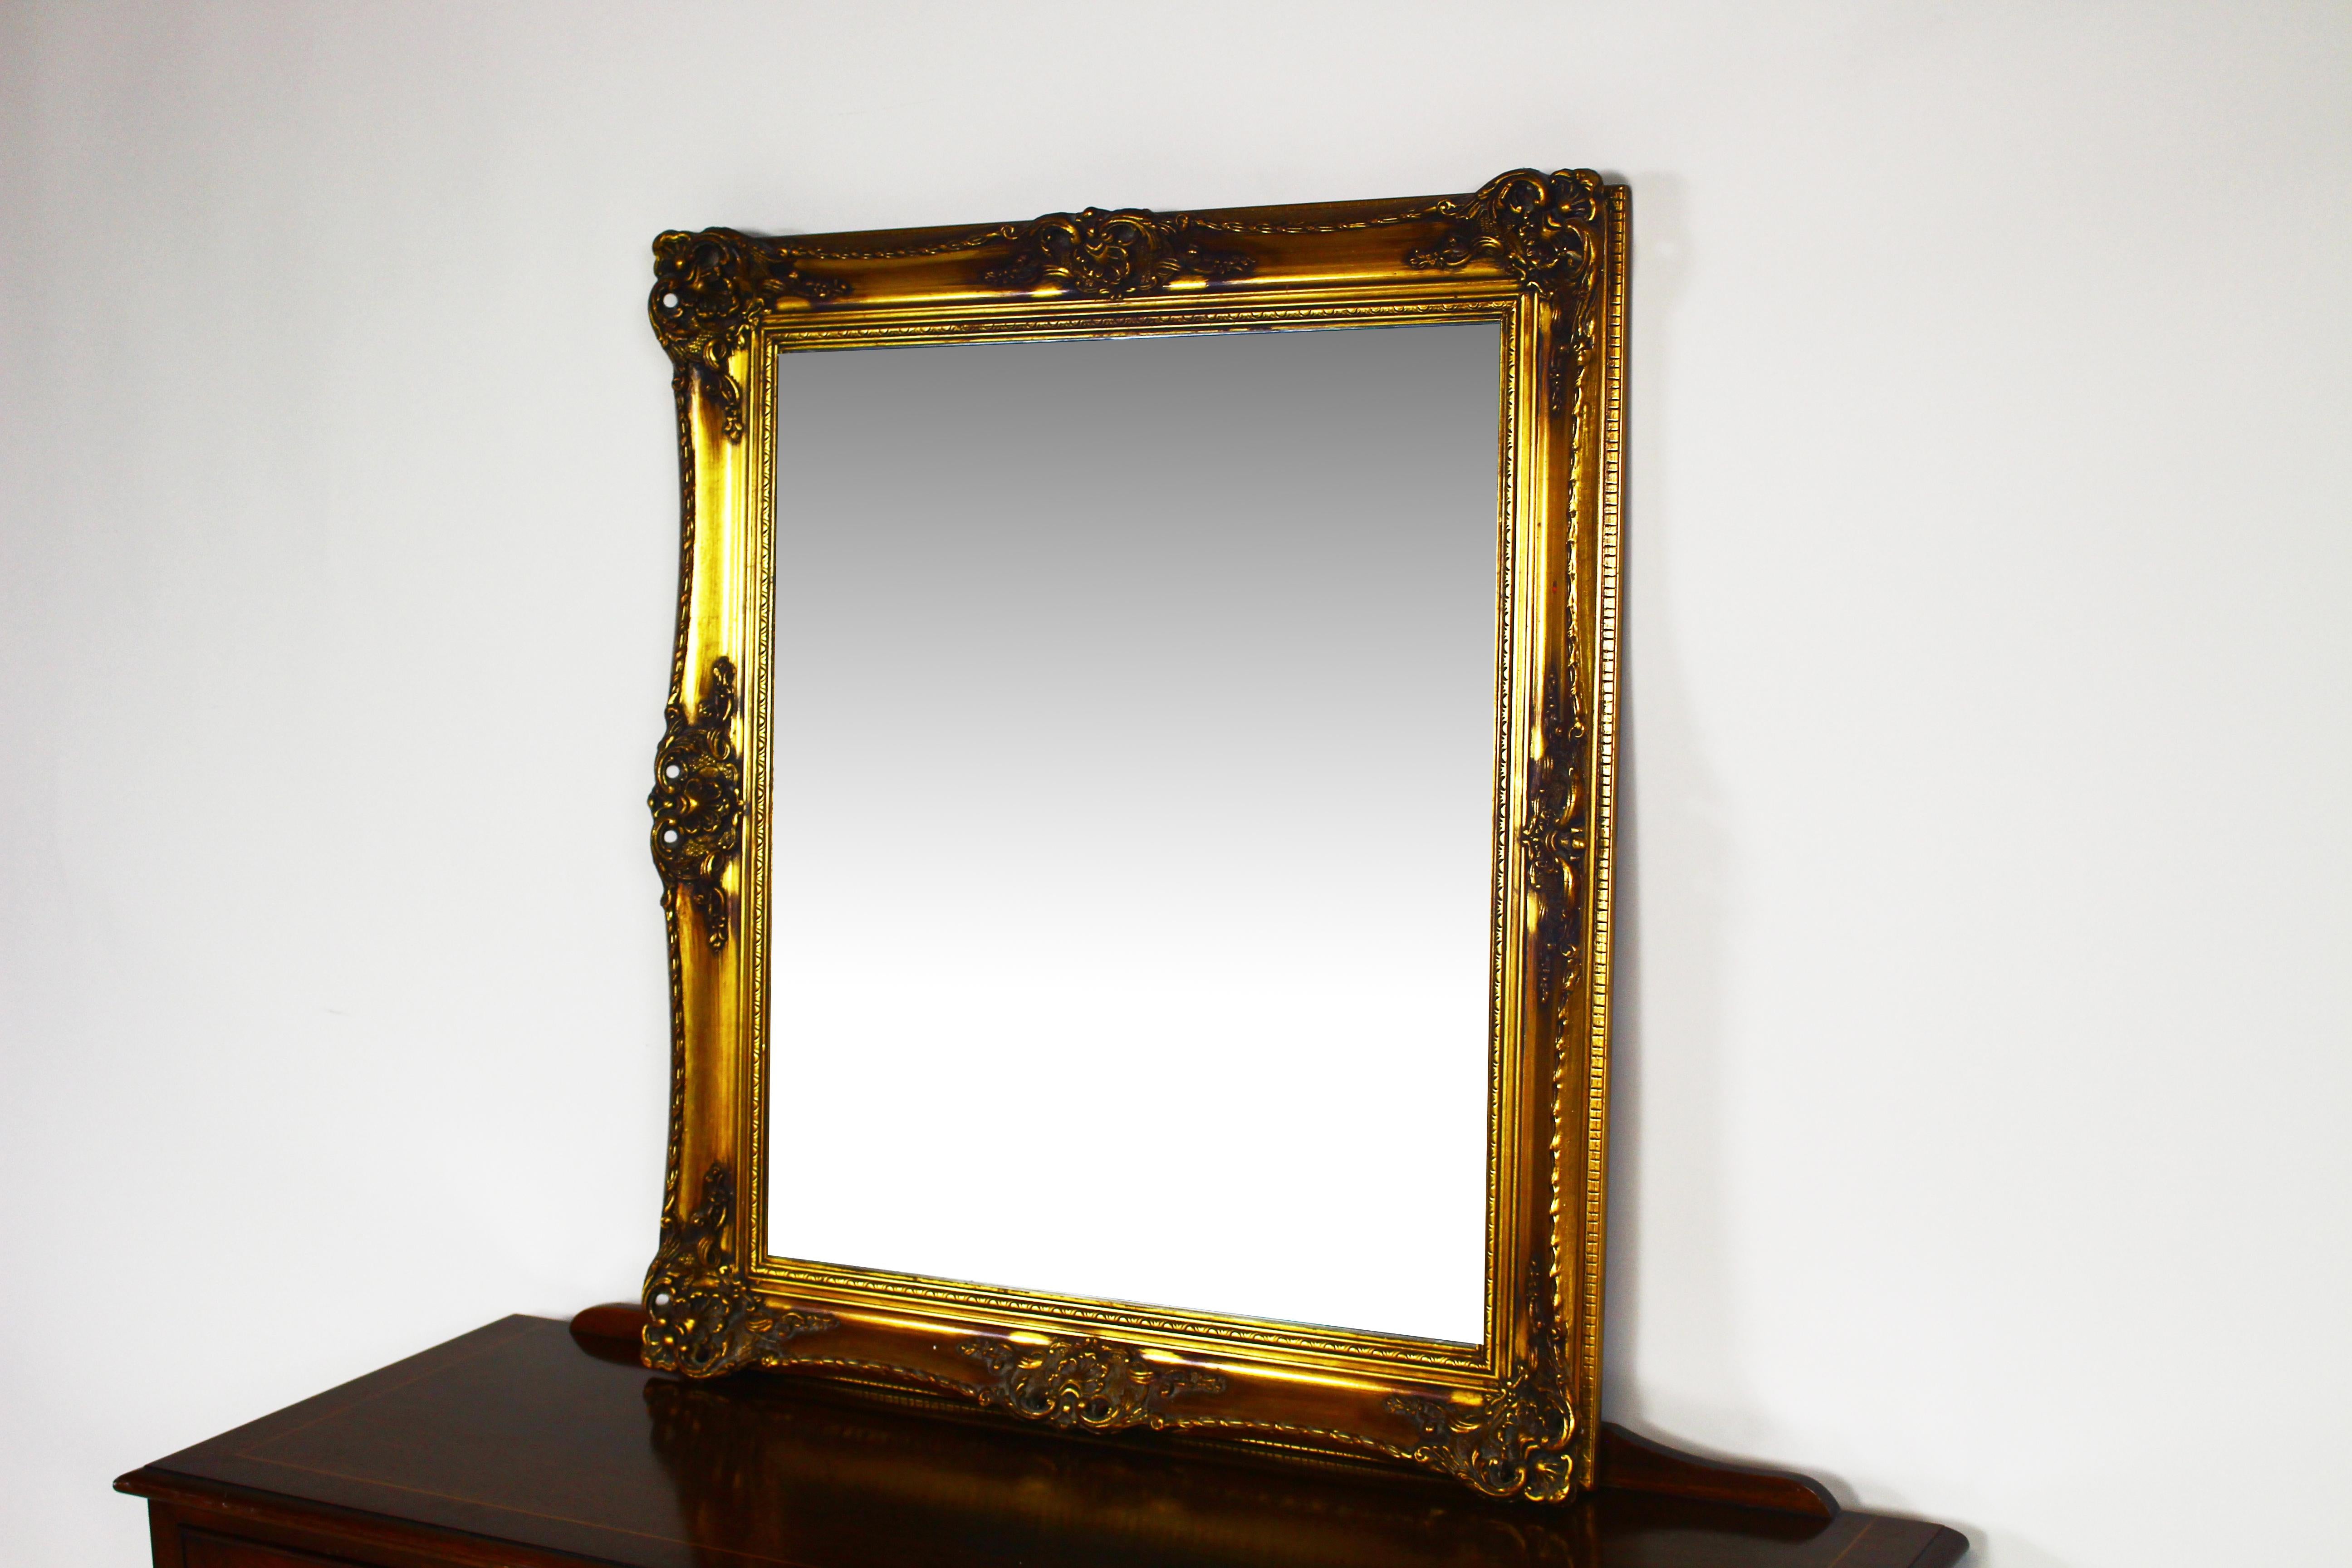 Stunning antique mirror with gilded frame.
Mirror with carved frame.
Good condition, ready for use.